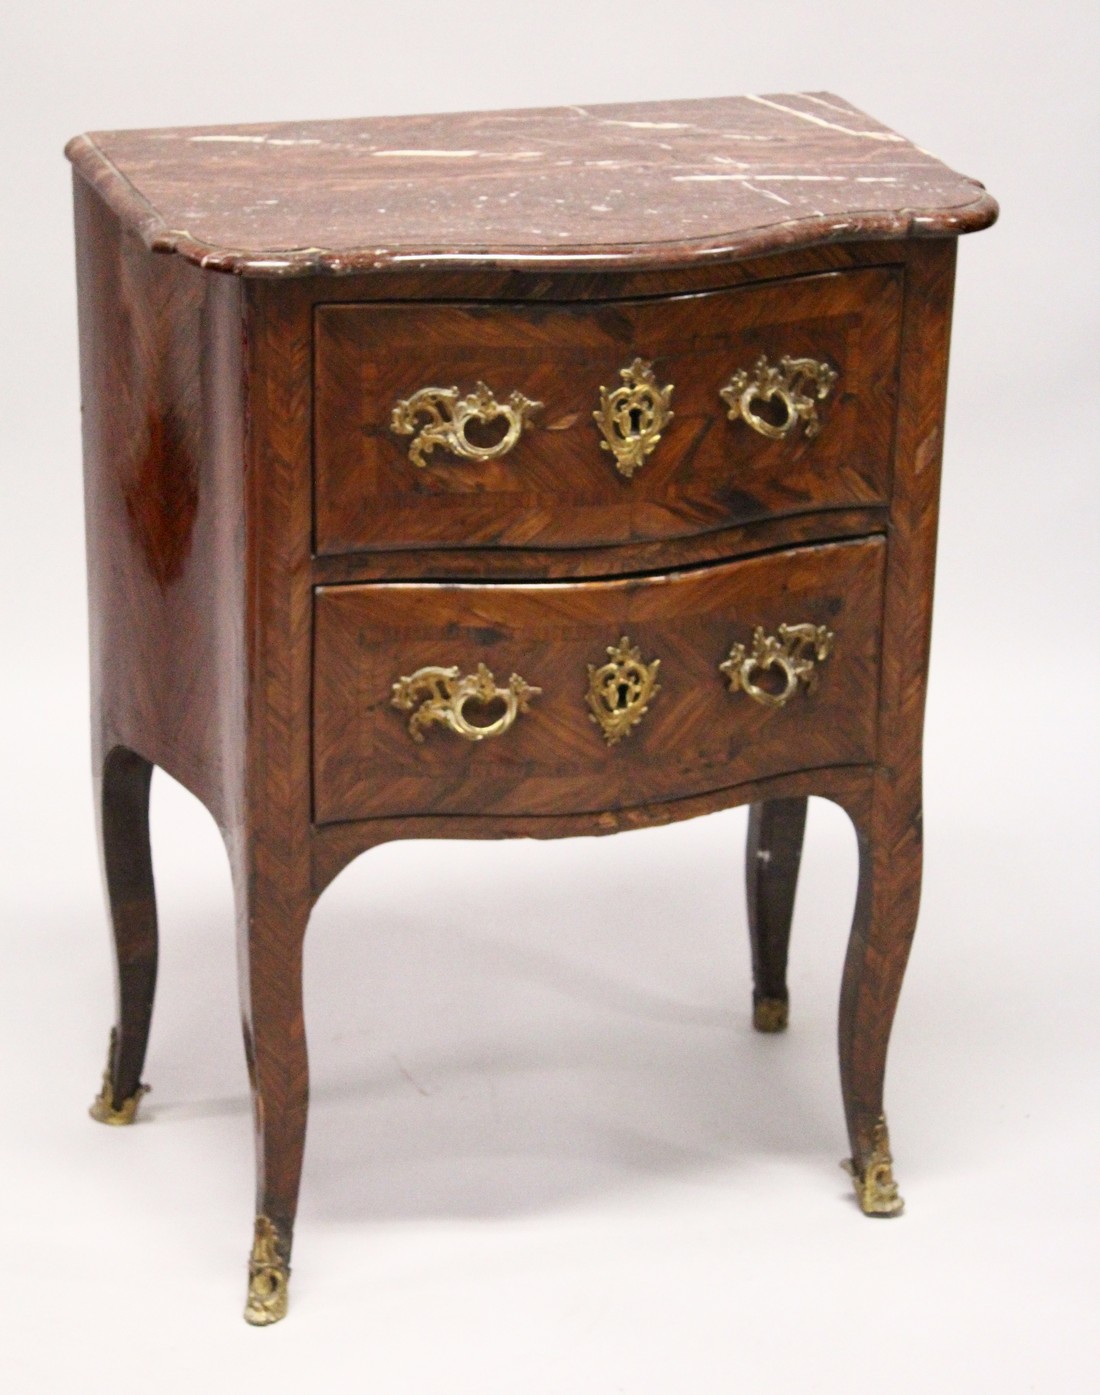 AN 18TH CENTURY FRENCH KINGWOOD, ORMOLU AND MARBLE TWO DRAWER SERPENTINE PETIT COMMODE, the shaped